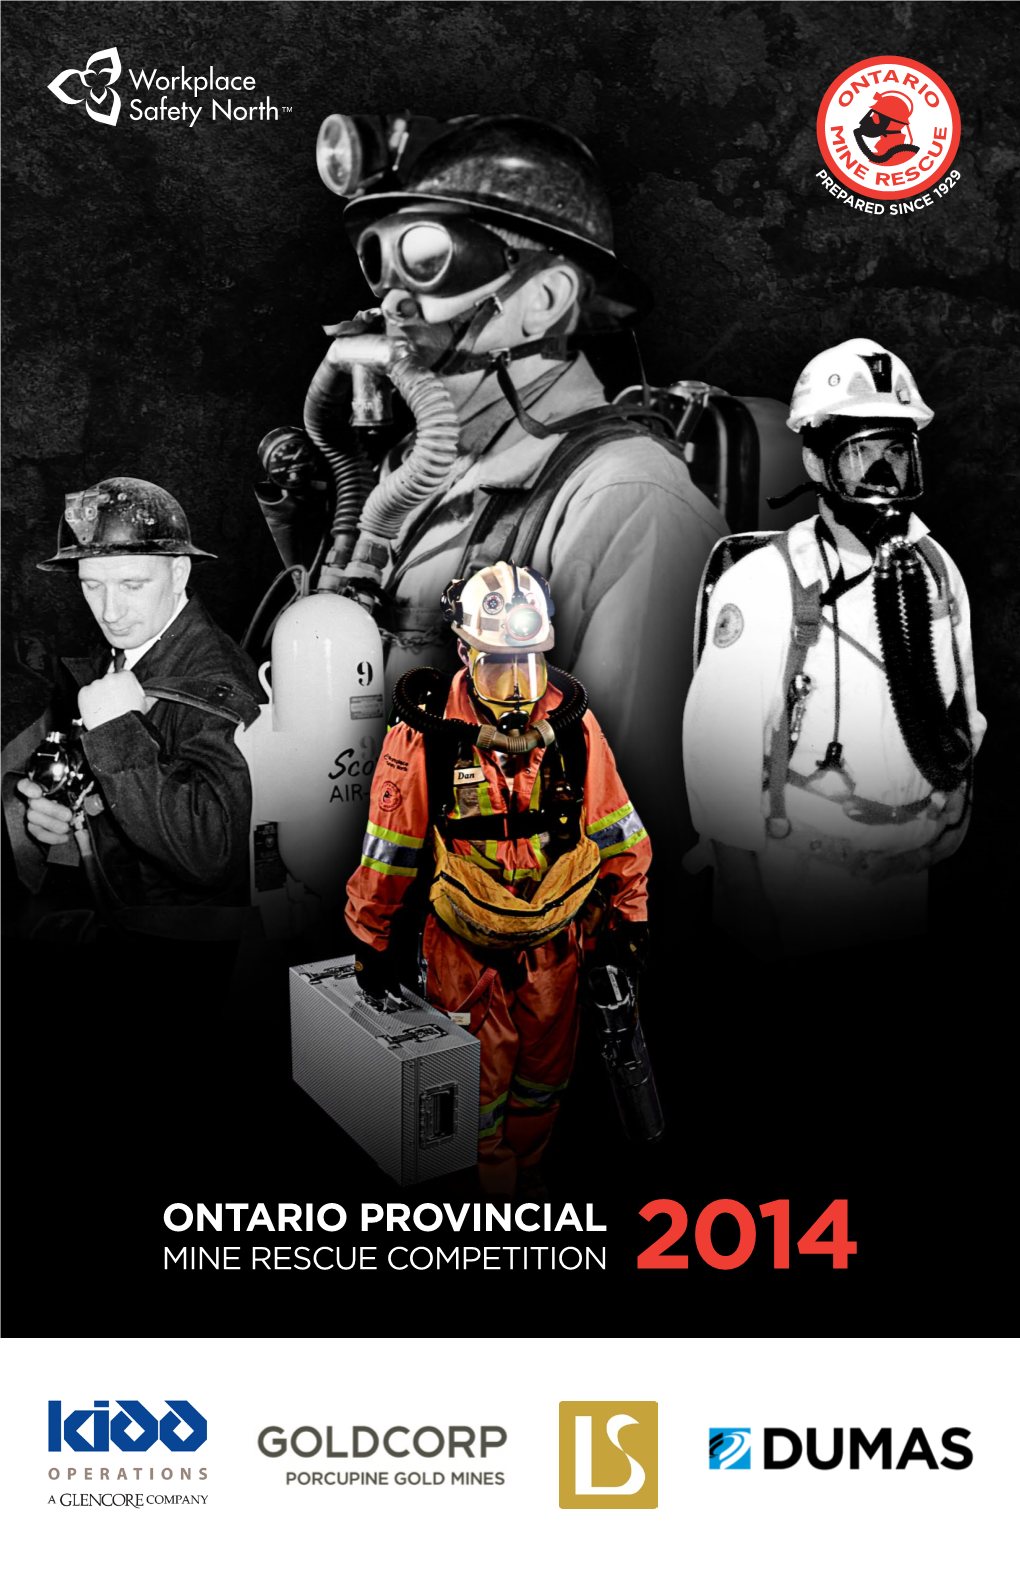 ONTARIO PROVINCIAL MINE RESCUE COMPETITION 2014 Our Mission and Vision